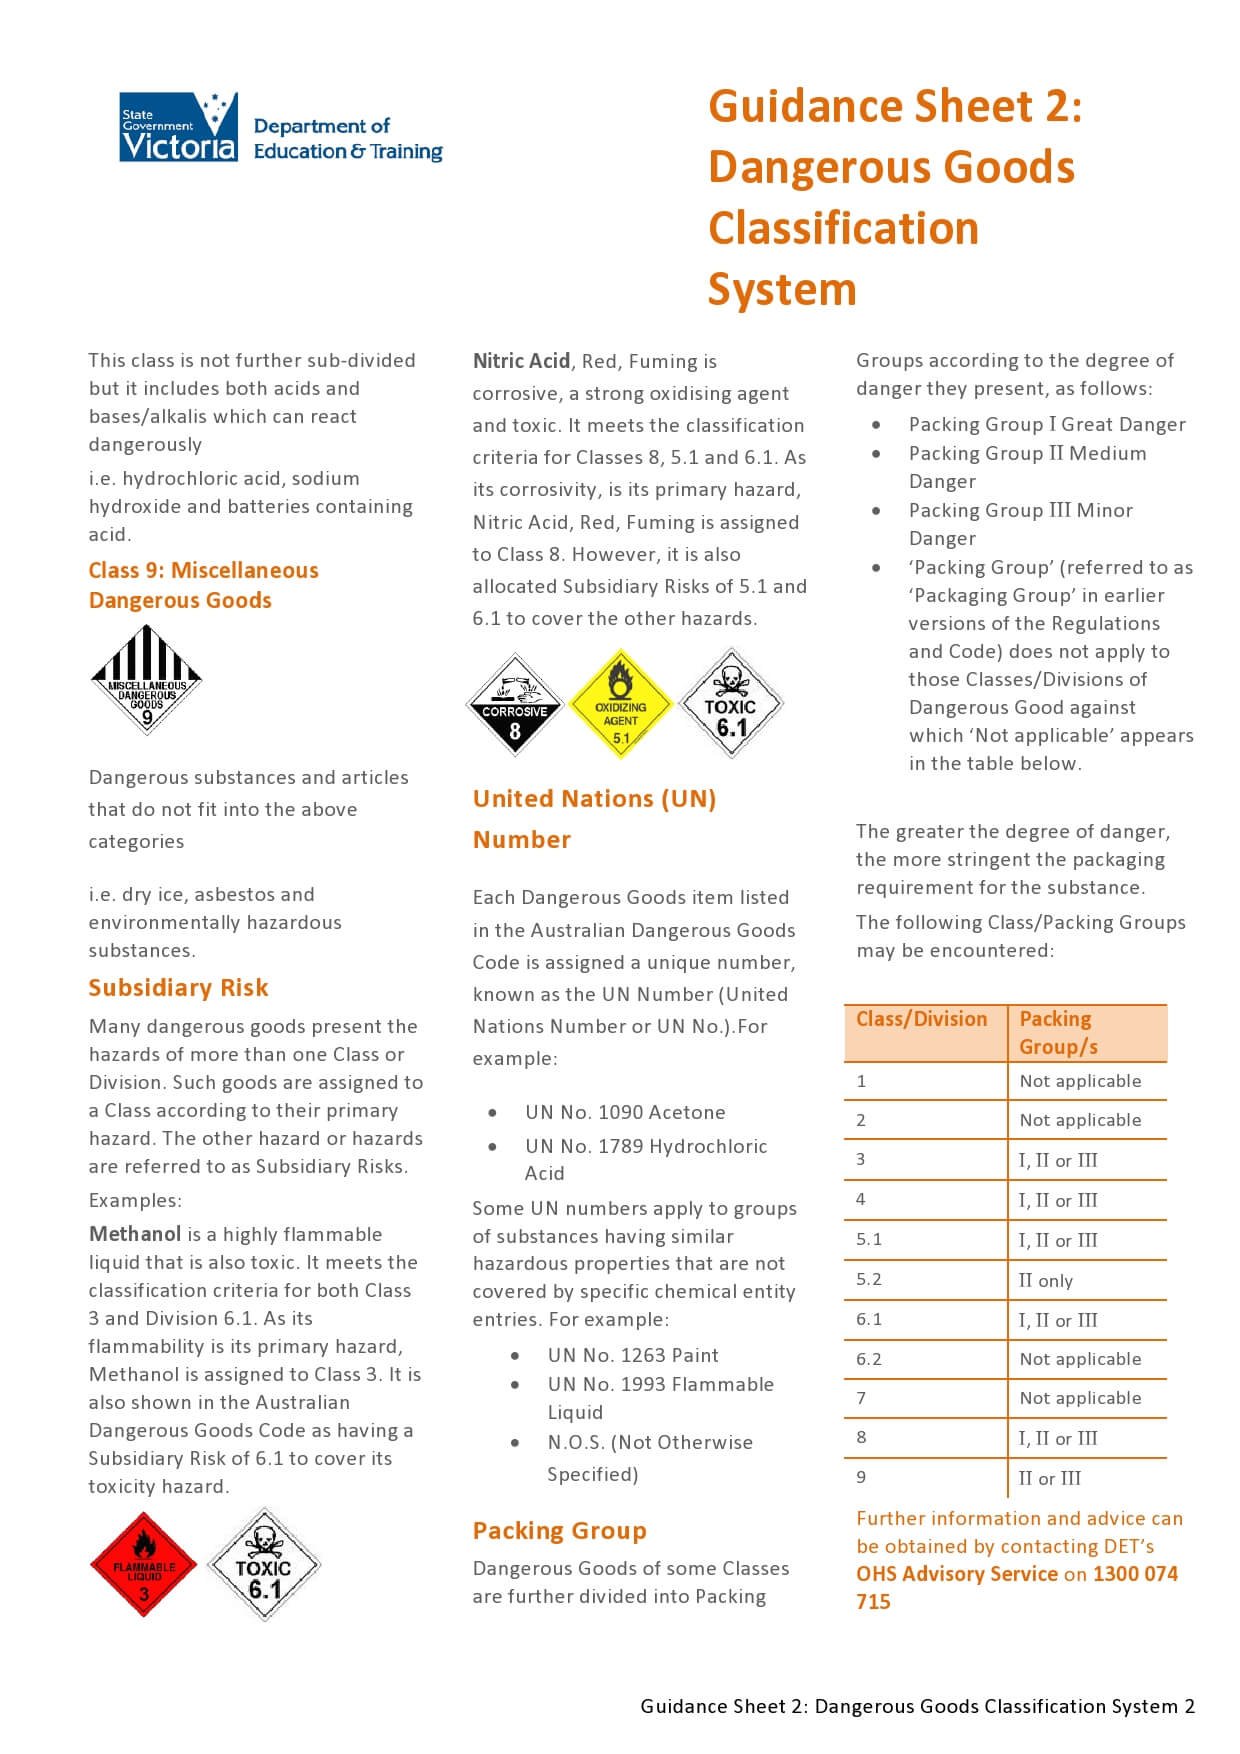 Guidance Sheet 2: Dangerous Goods Classification System (continued)